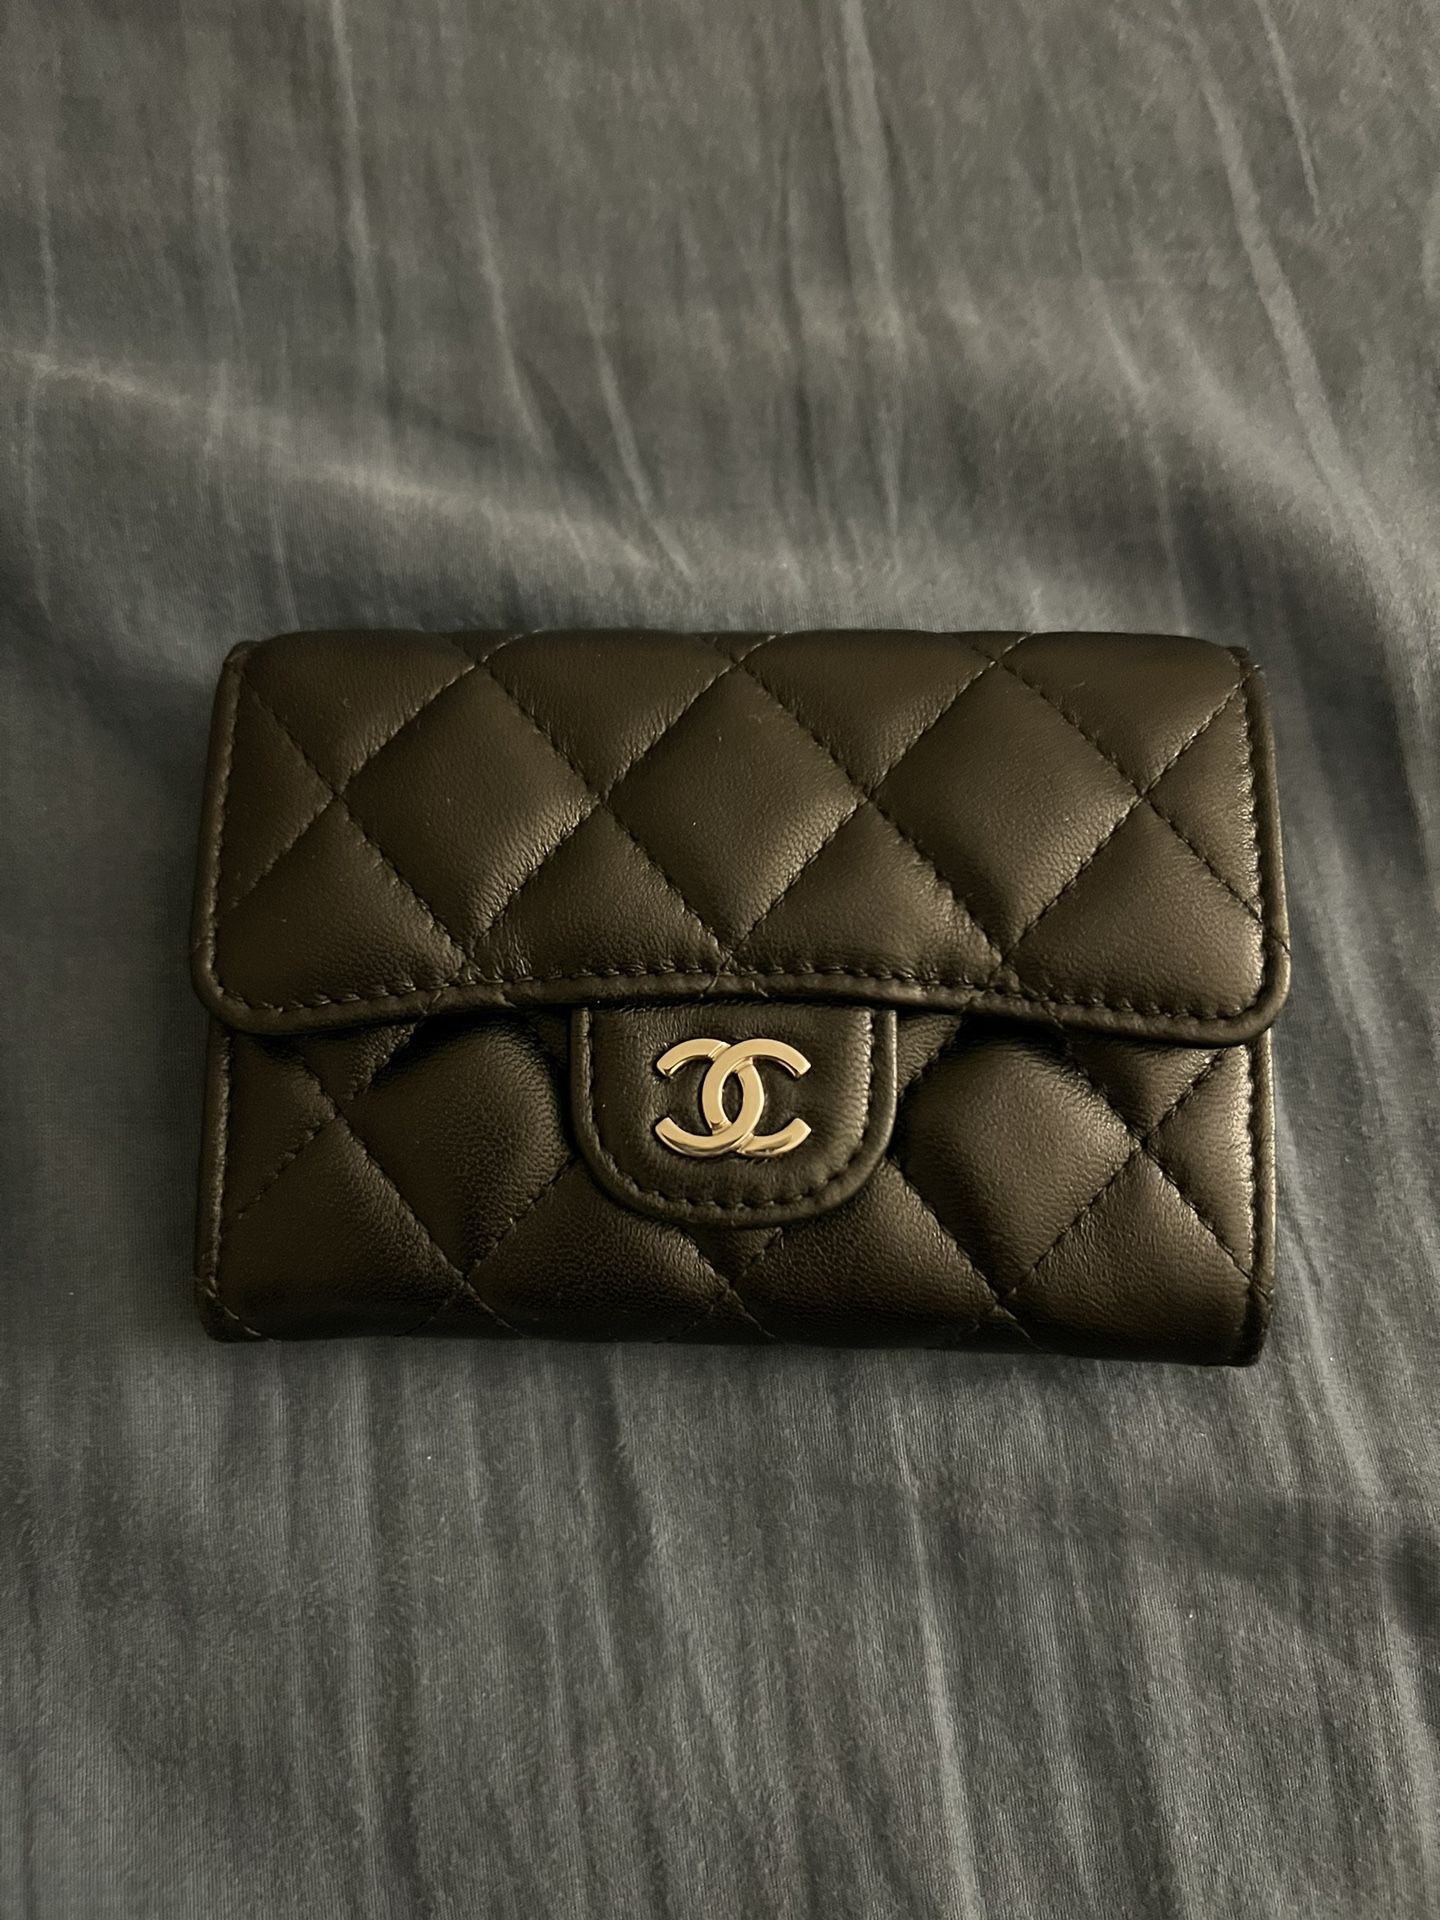 CHANEL CLASSIC CARD HOLDER 